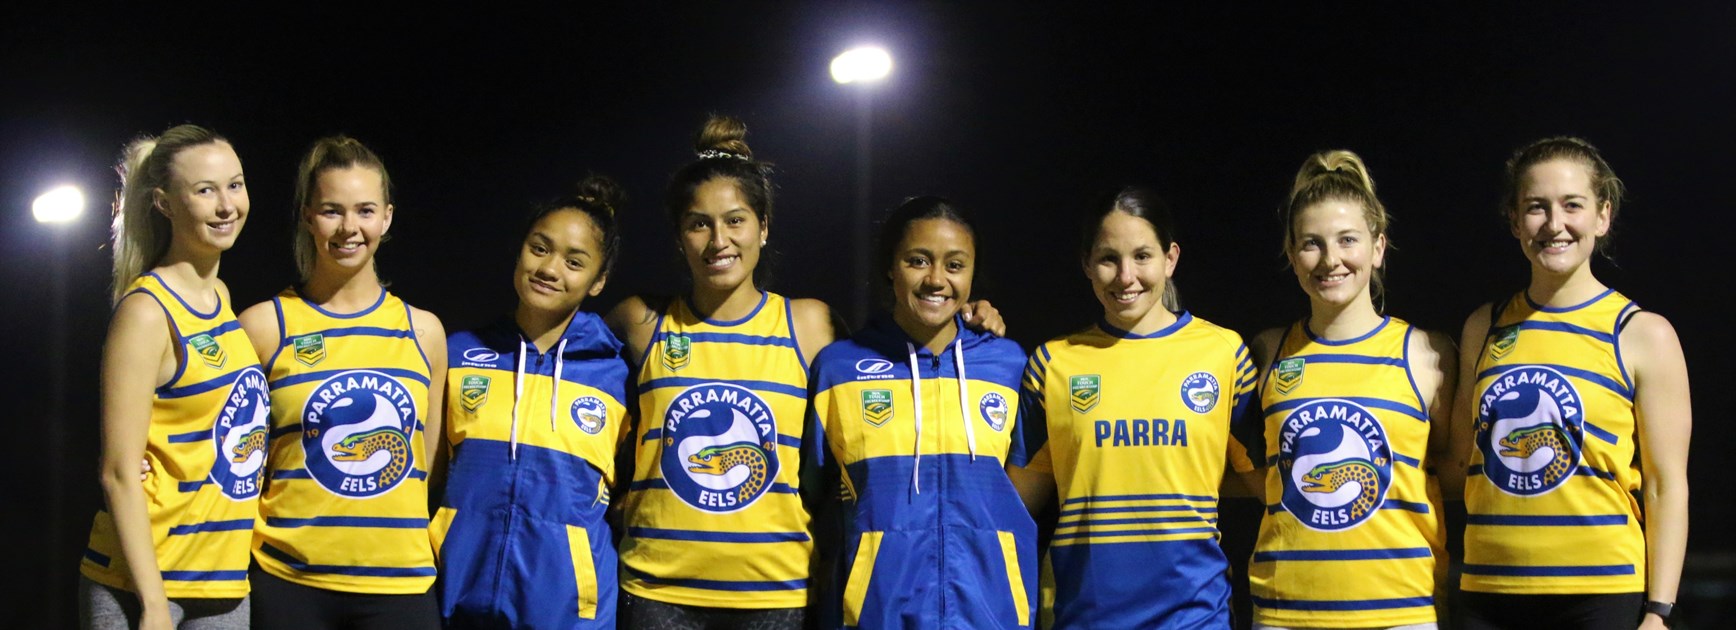 It's family first in the Parramatta Eels women's NRL Touch team. 